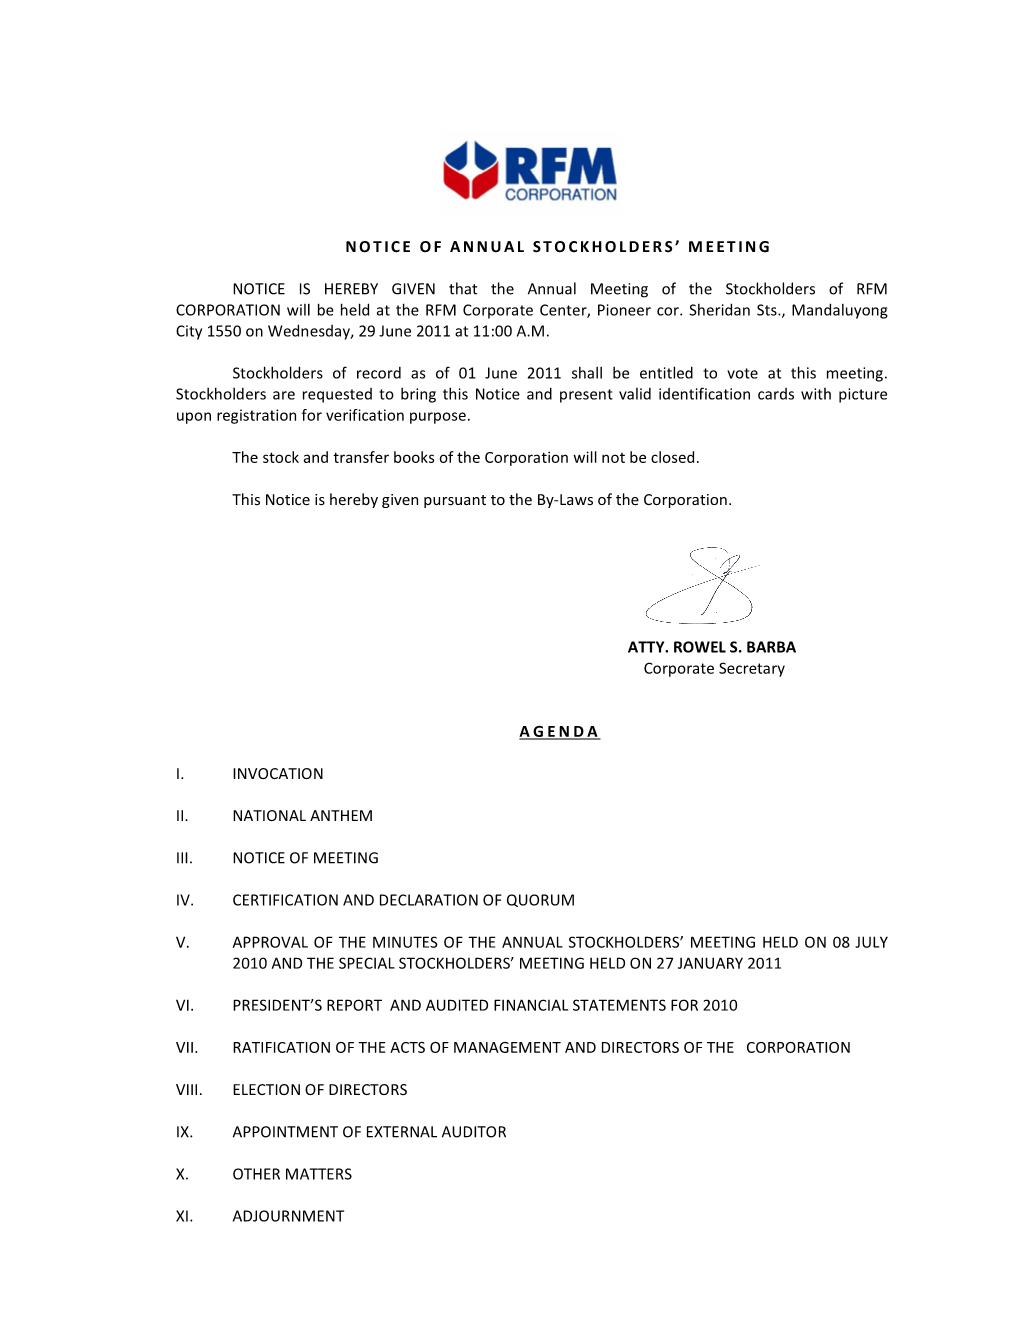 NOTICE of ANNUAL STOCKHOLDERS' MEETING NOTICE IS HEREBY GIVEN That the Annual Meeting of the Stockholders of RFM CORPORATION W